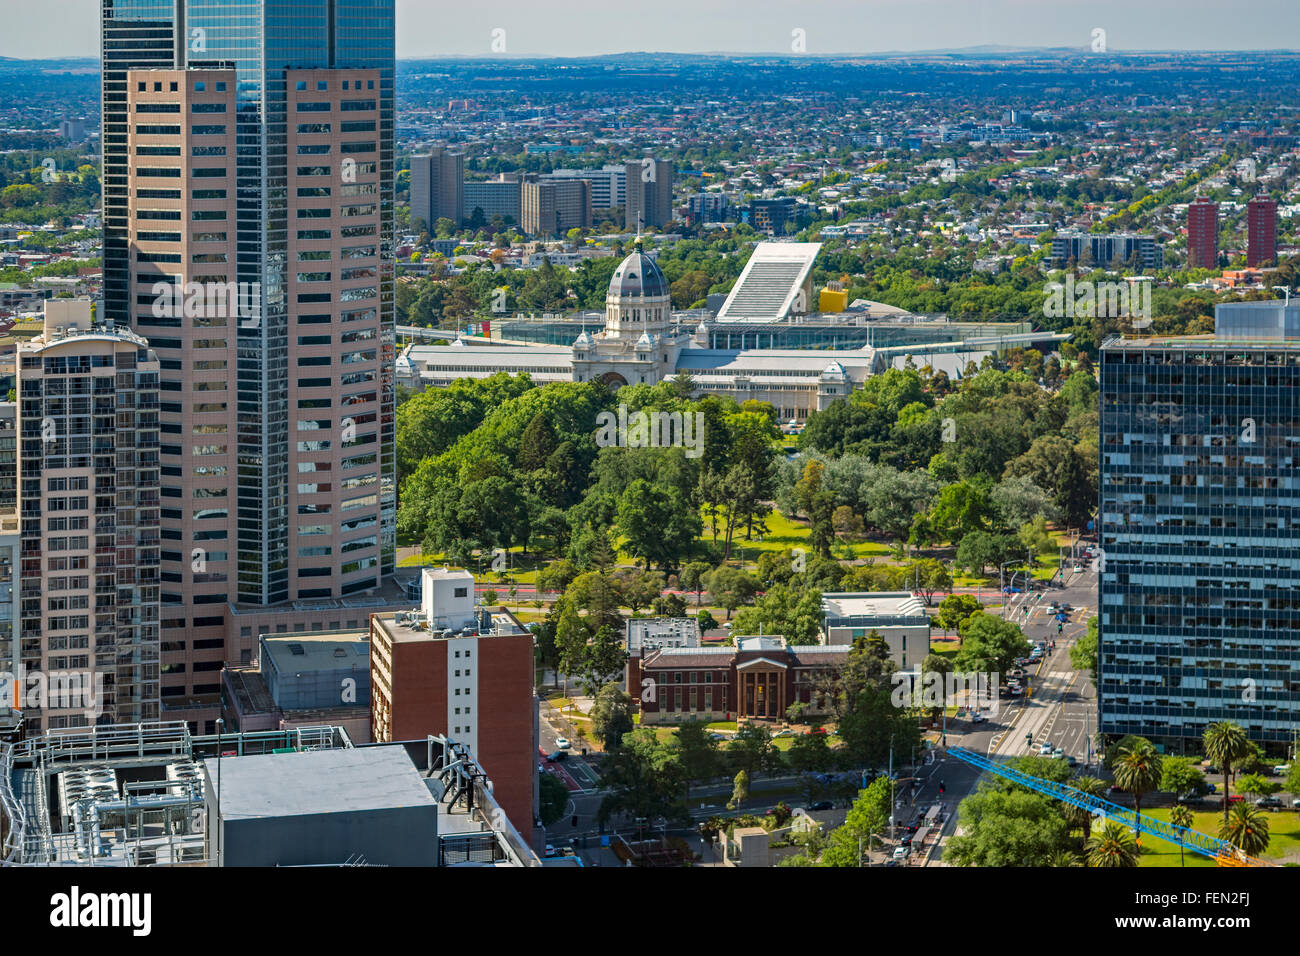 Panorama of Melbourne, Australia, showing Royal Exhibition Building and Carlton Gardens Stock Photo